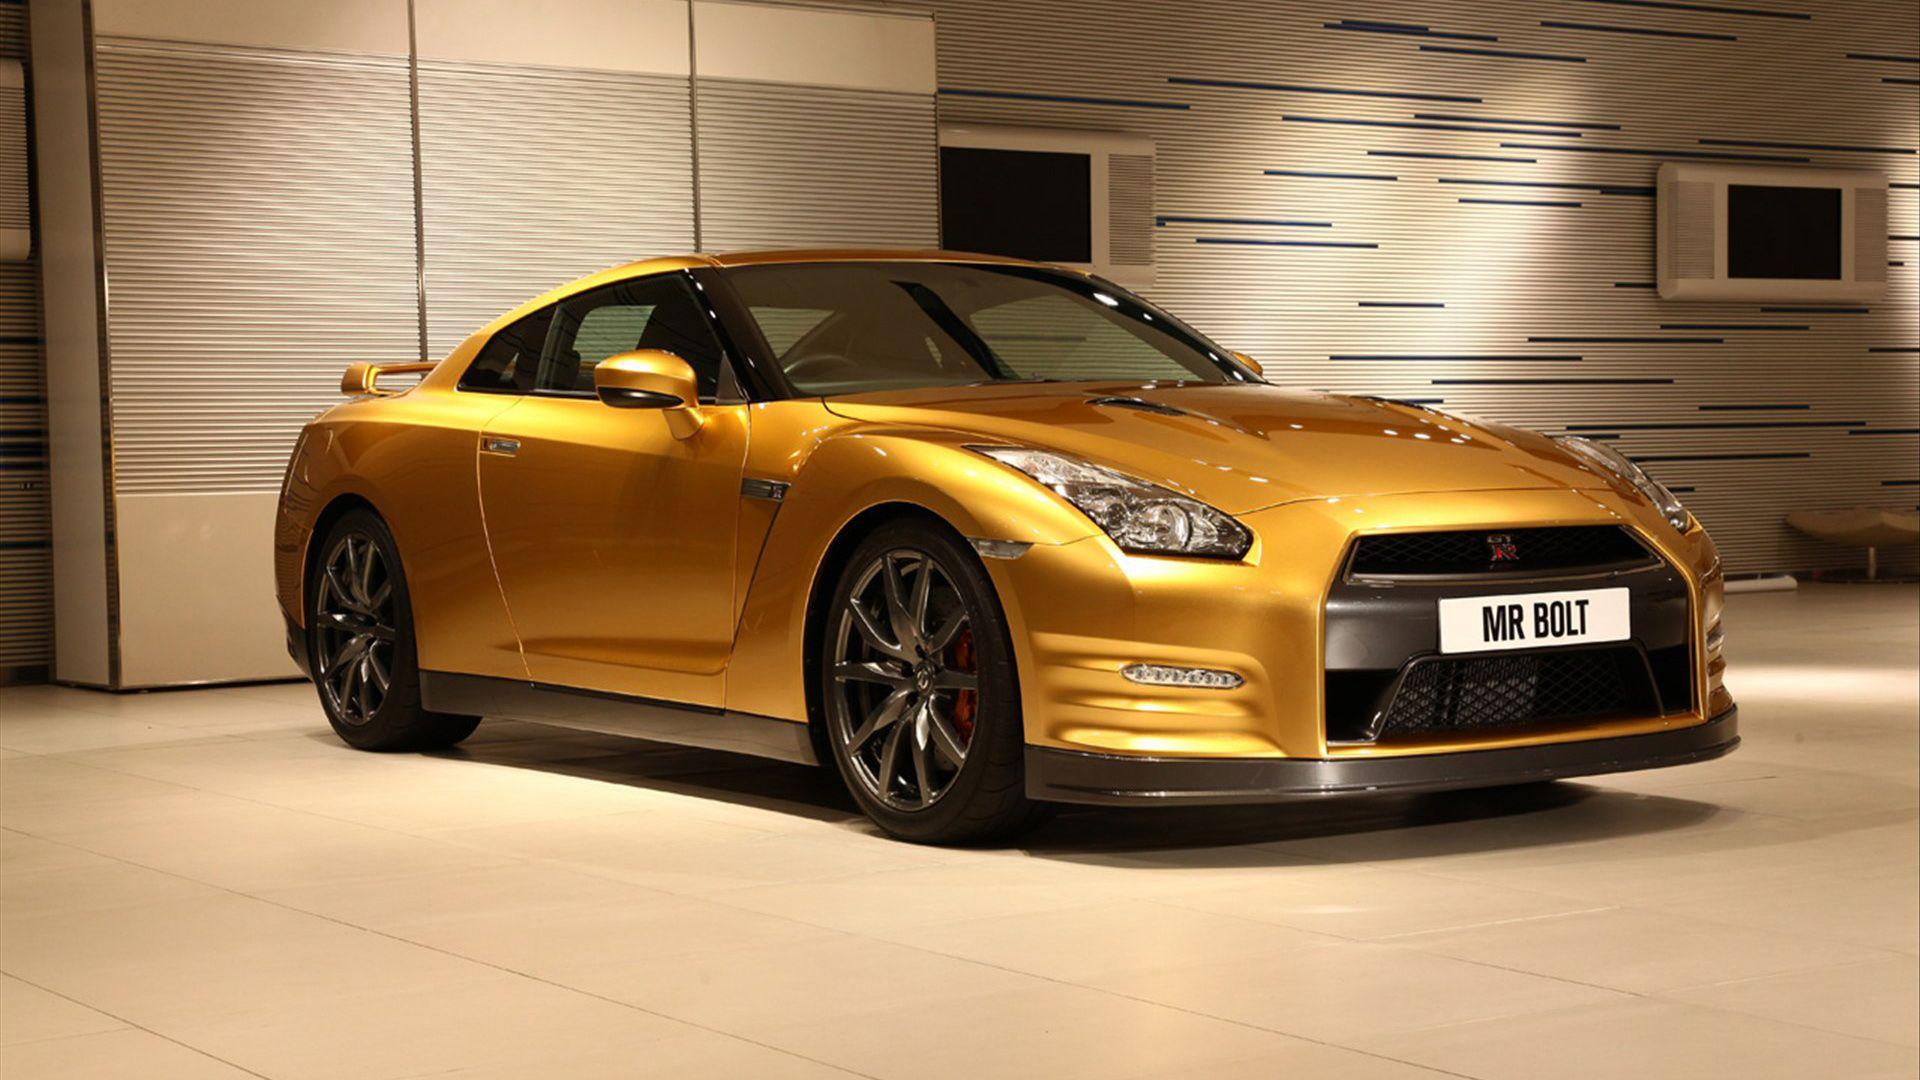 Wallpaper Tagged With GOLD. GOLD Car Wallpaper, Image